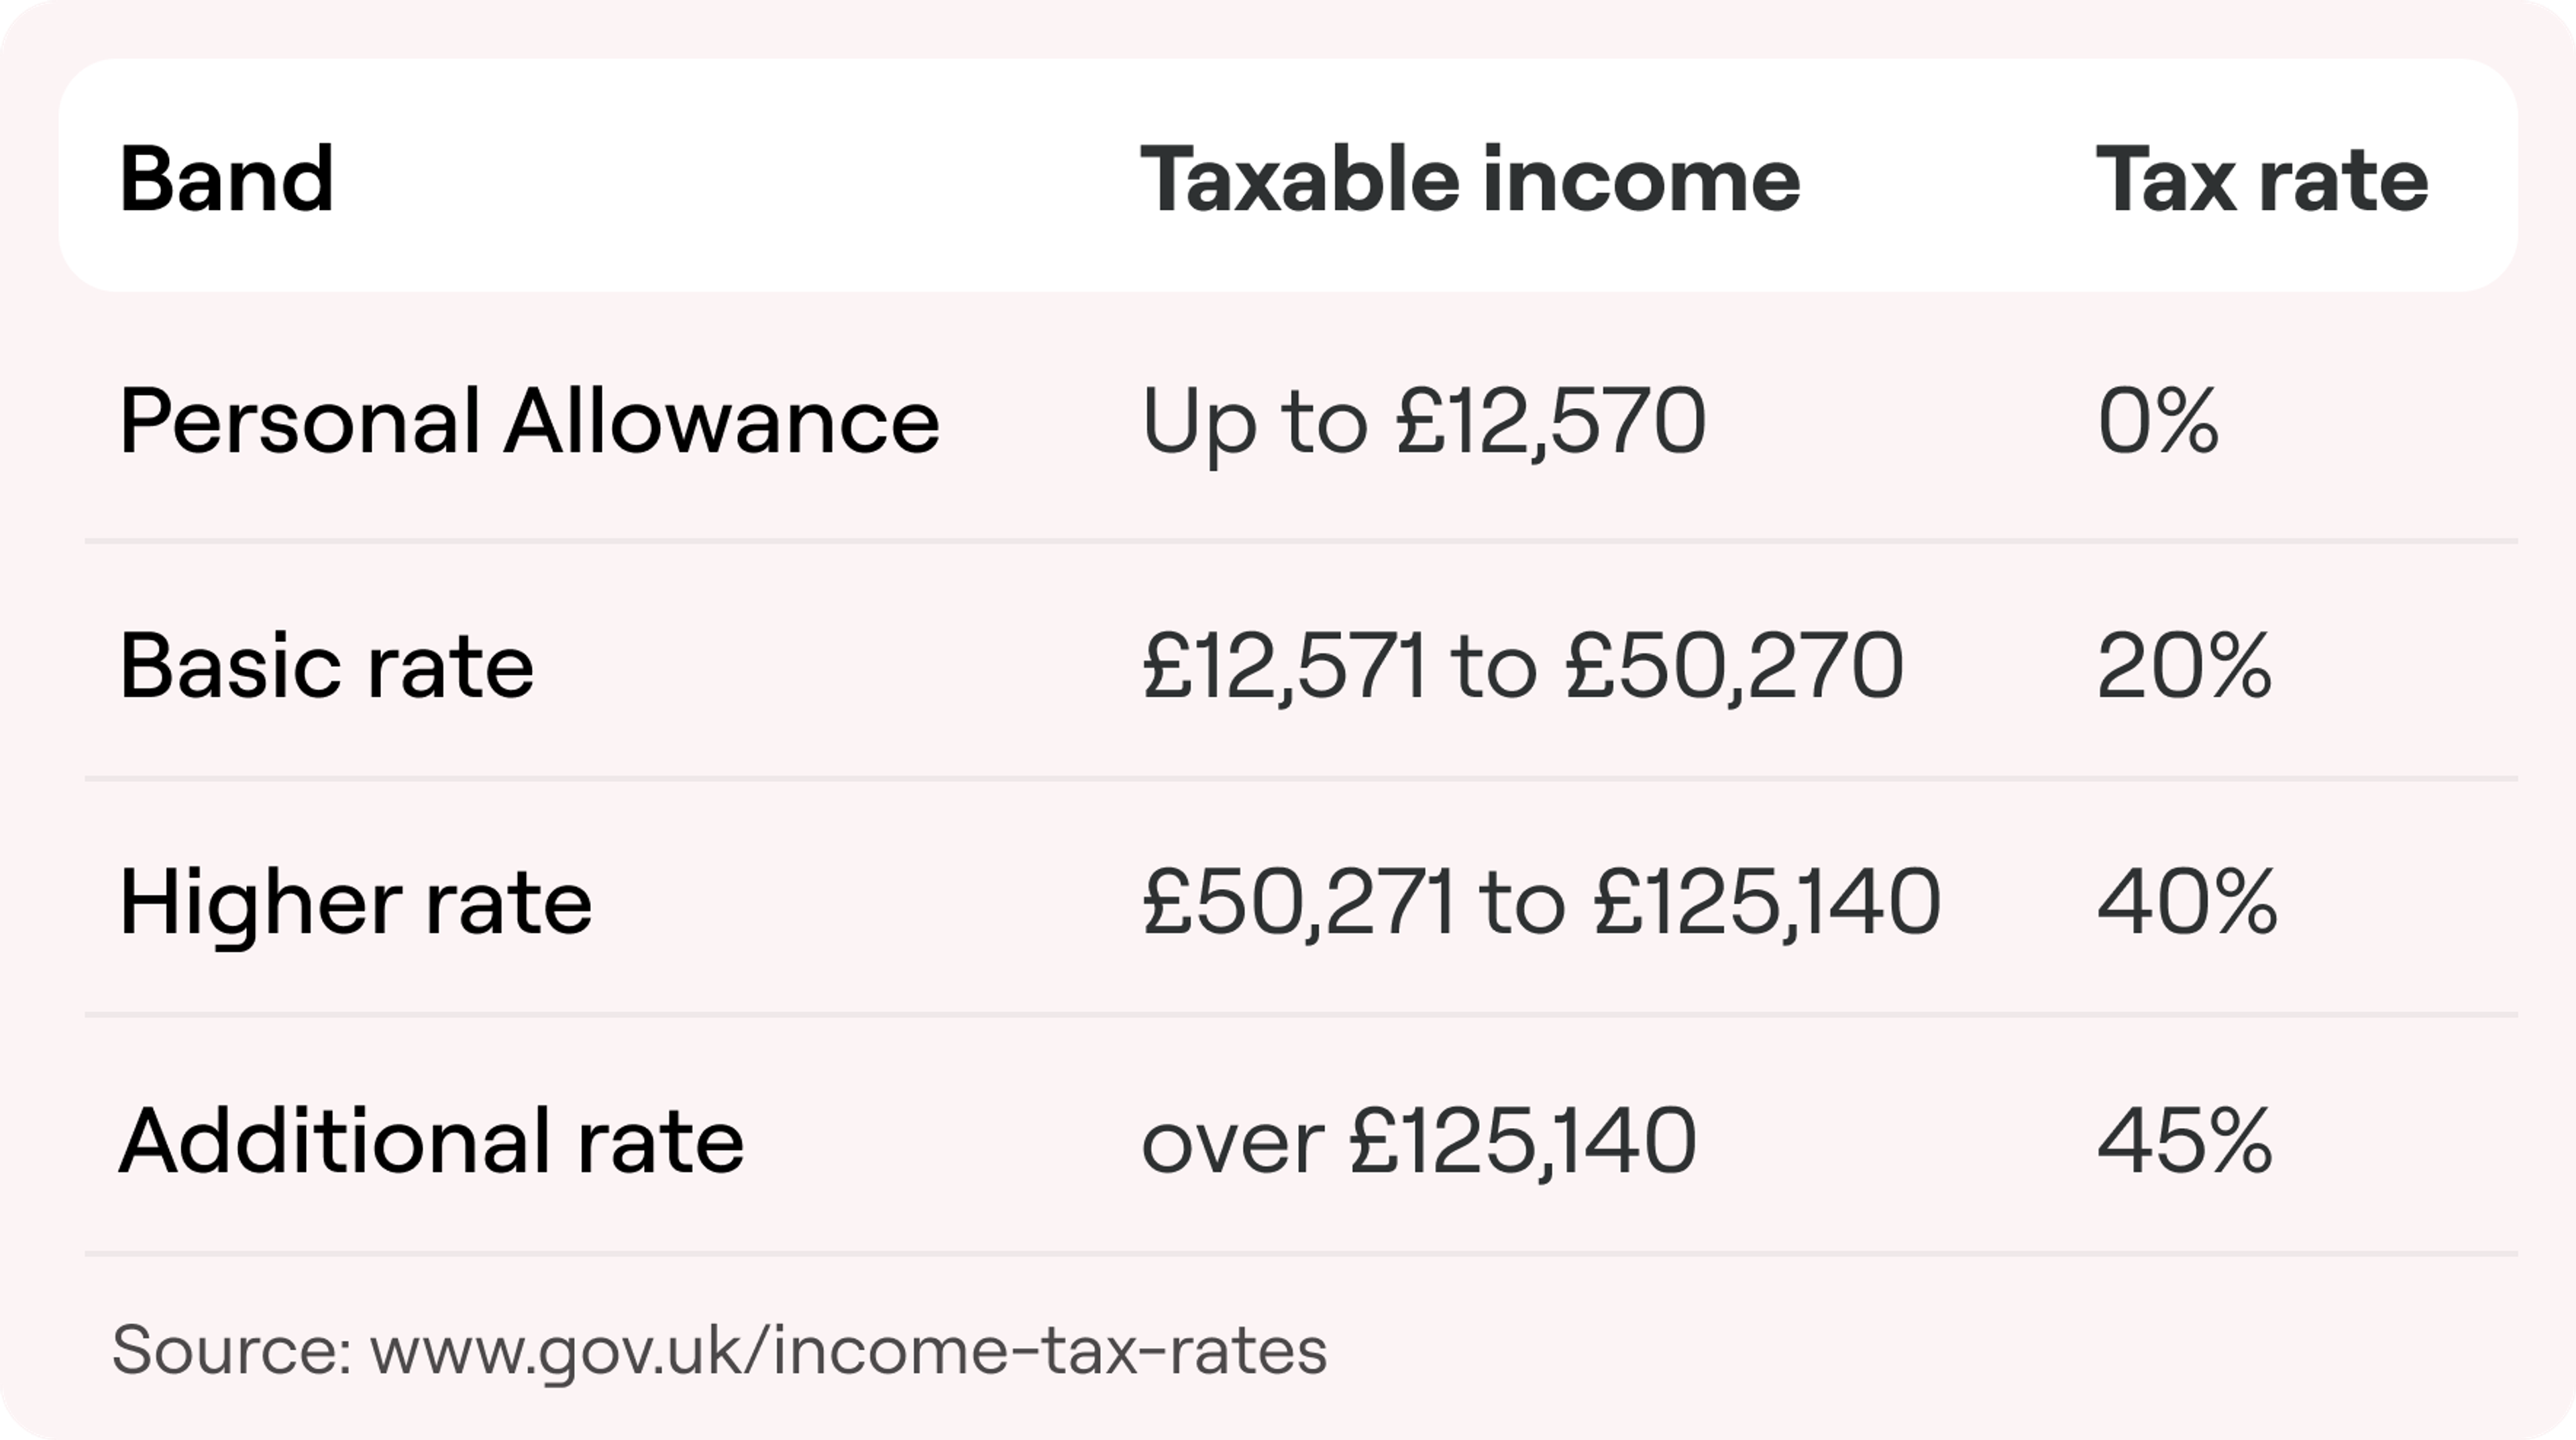 A table showing UK income tax rates for different income bands. The 'Personal Allowance' band is up to £12,570 with a 0% tax rate. The 'Basic rate' is £12,571 to £50,270 with a 20% tax rate. The 'Higher rate' covers £50,271 to £125,140 with a 40% tax rate, and the 'Additional rate' applies to income over £125,140 with a 45% tax rate. Below the table is the source: www.gov.uk/income-tax-rates.